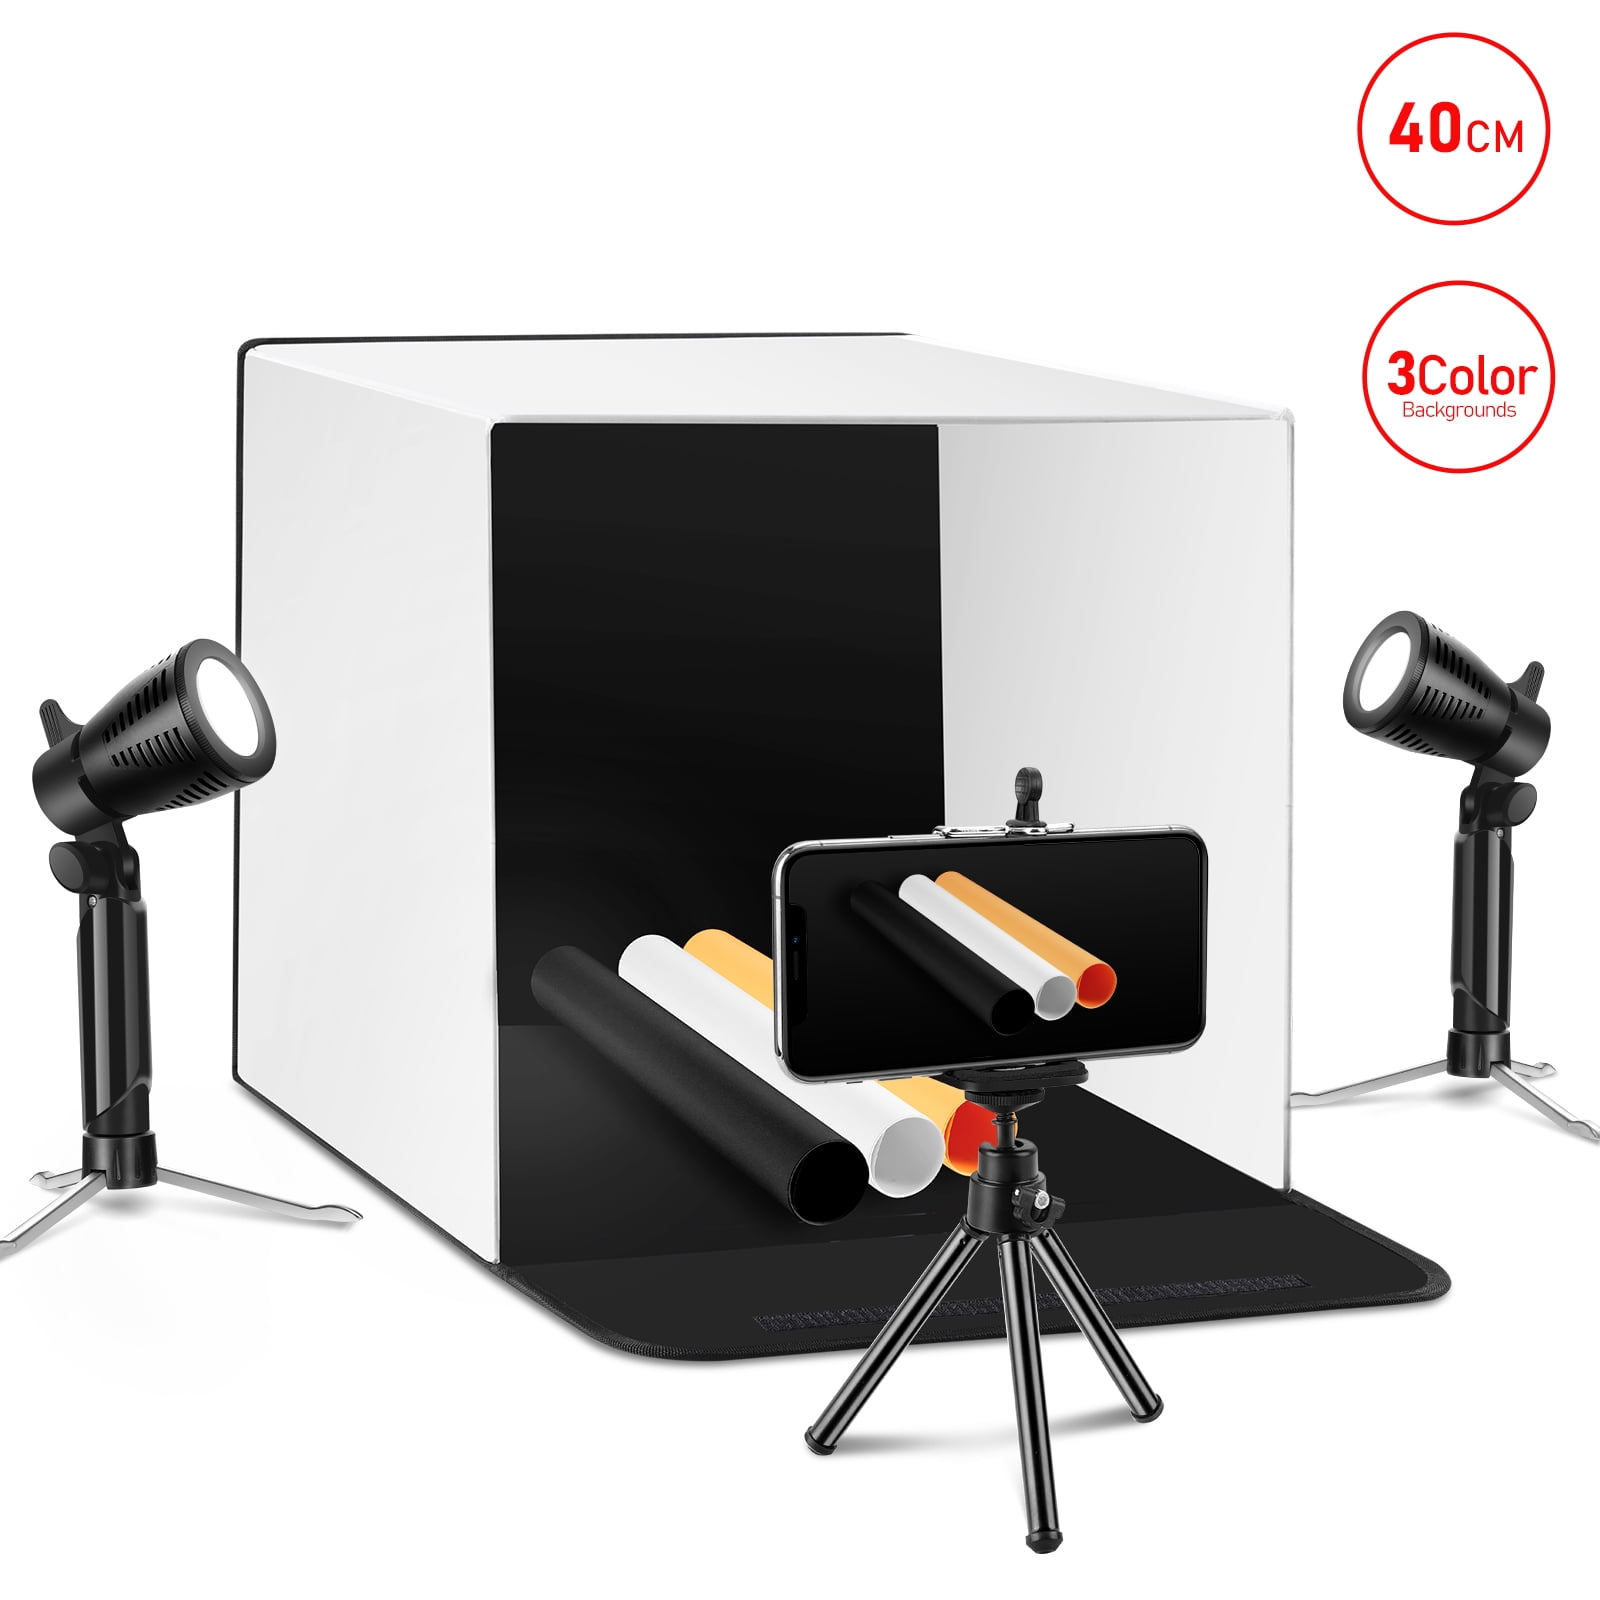  Professional Large Photo Light Box Photography Studio  47x32x63 LED Dimmable Shooting Tent Continuous Lighting Cube Softbox for  Portrait Clothing Photography with 3 Color Backdrops : Electronics